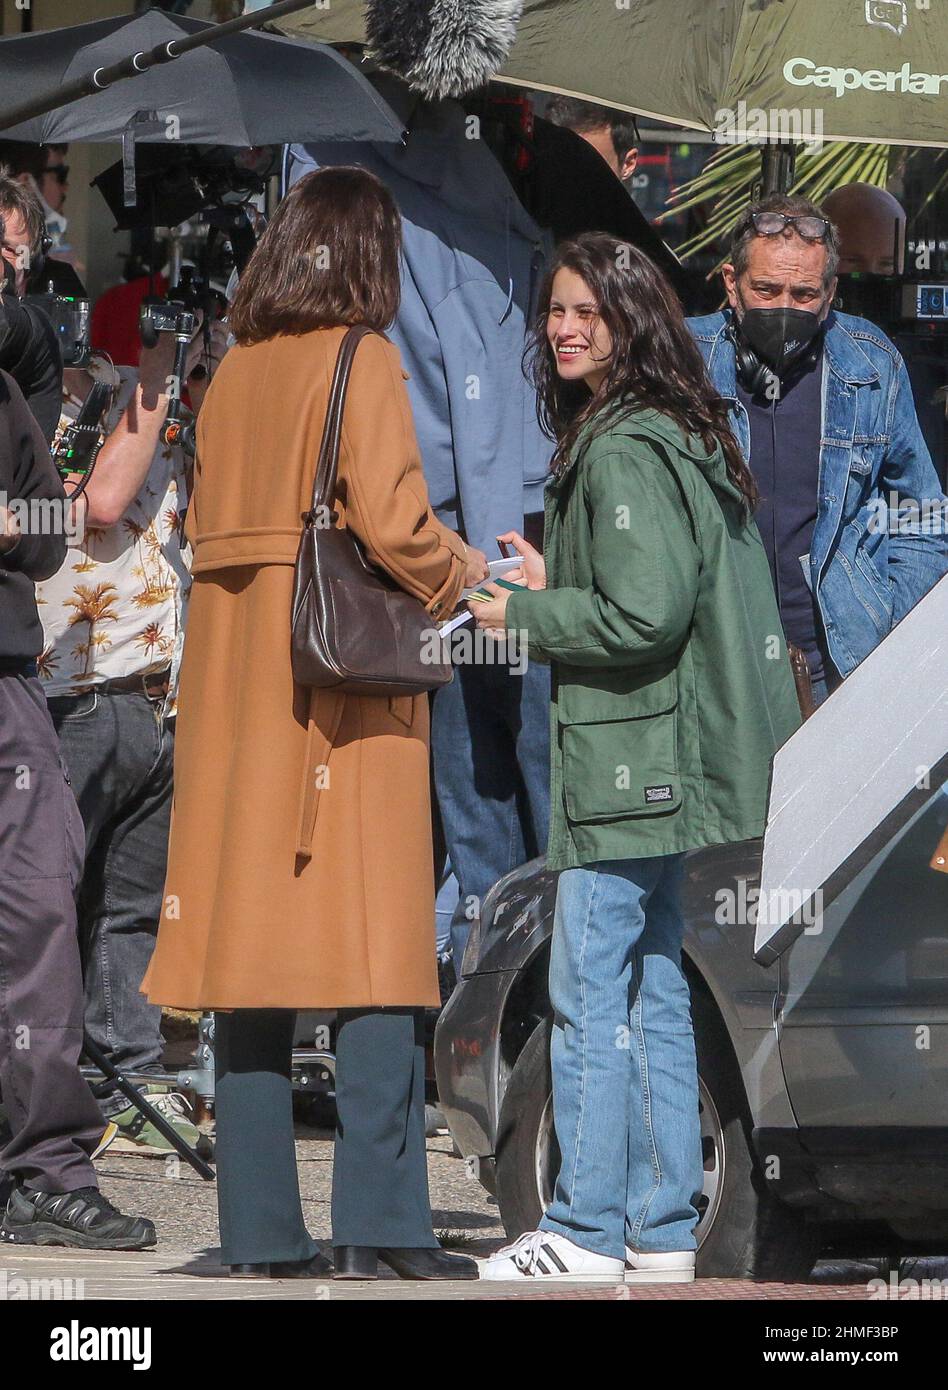 February 9, 2022: February 9, 2022 (Malaga) Netflix's La chica de nieve series has begun filming its new fiction based on Javier Castillo's best-seller, a six-episode thriller starring Milena Smit and José Coronado, who joins the cast as a star signing. In the photos you can see Milena Smit (Green Jacket) filming on the promenade of La Malagueta. (Credit Image: © Lorenzo Carnero/ZUMA Press Wire) Stock Photo